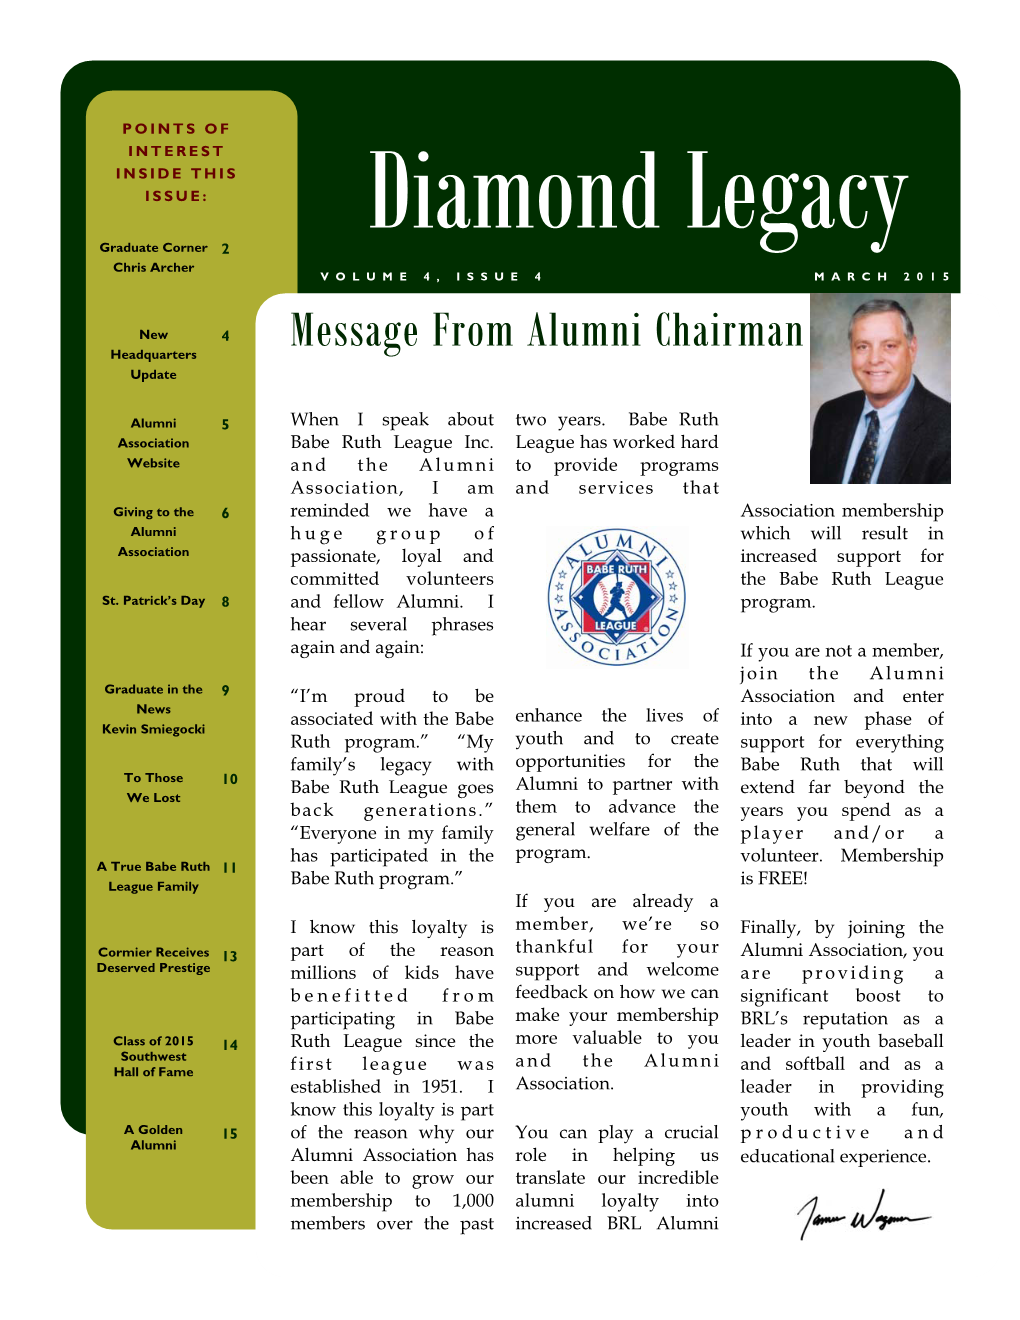 Message from Alumni Chairman Headquarters Update